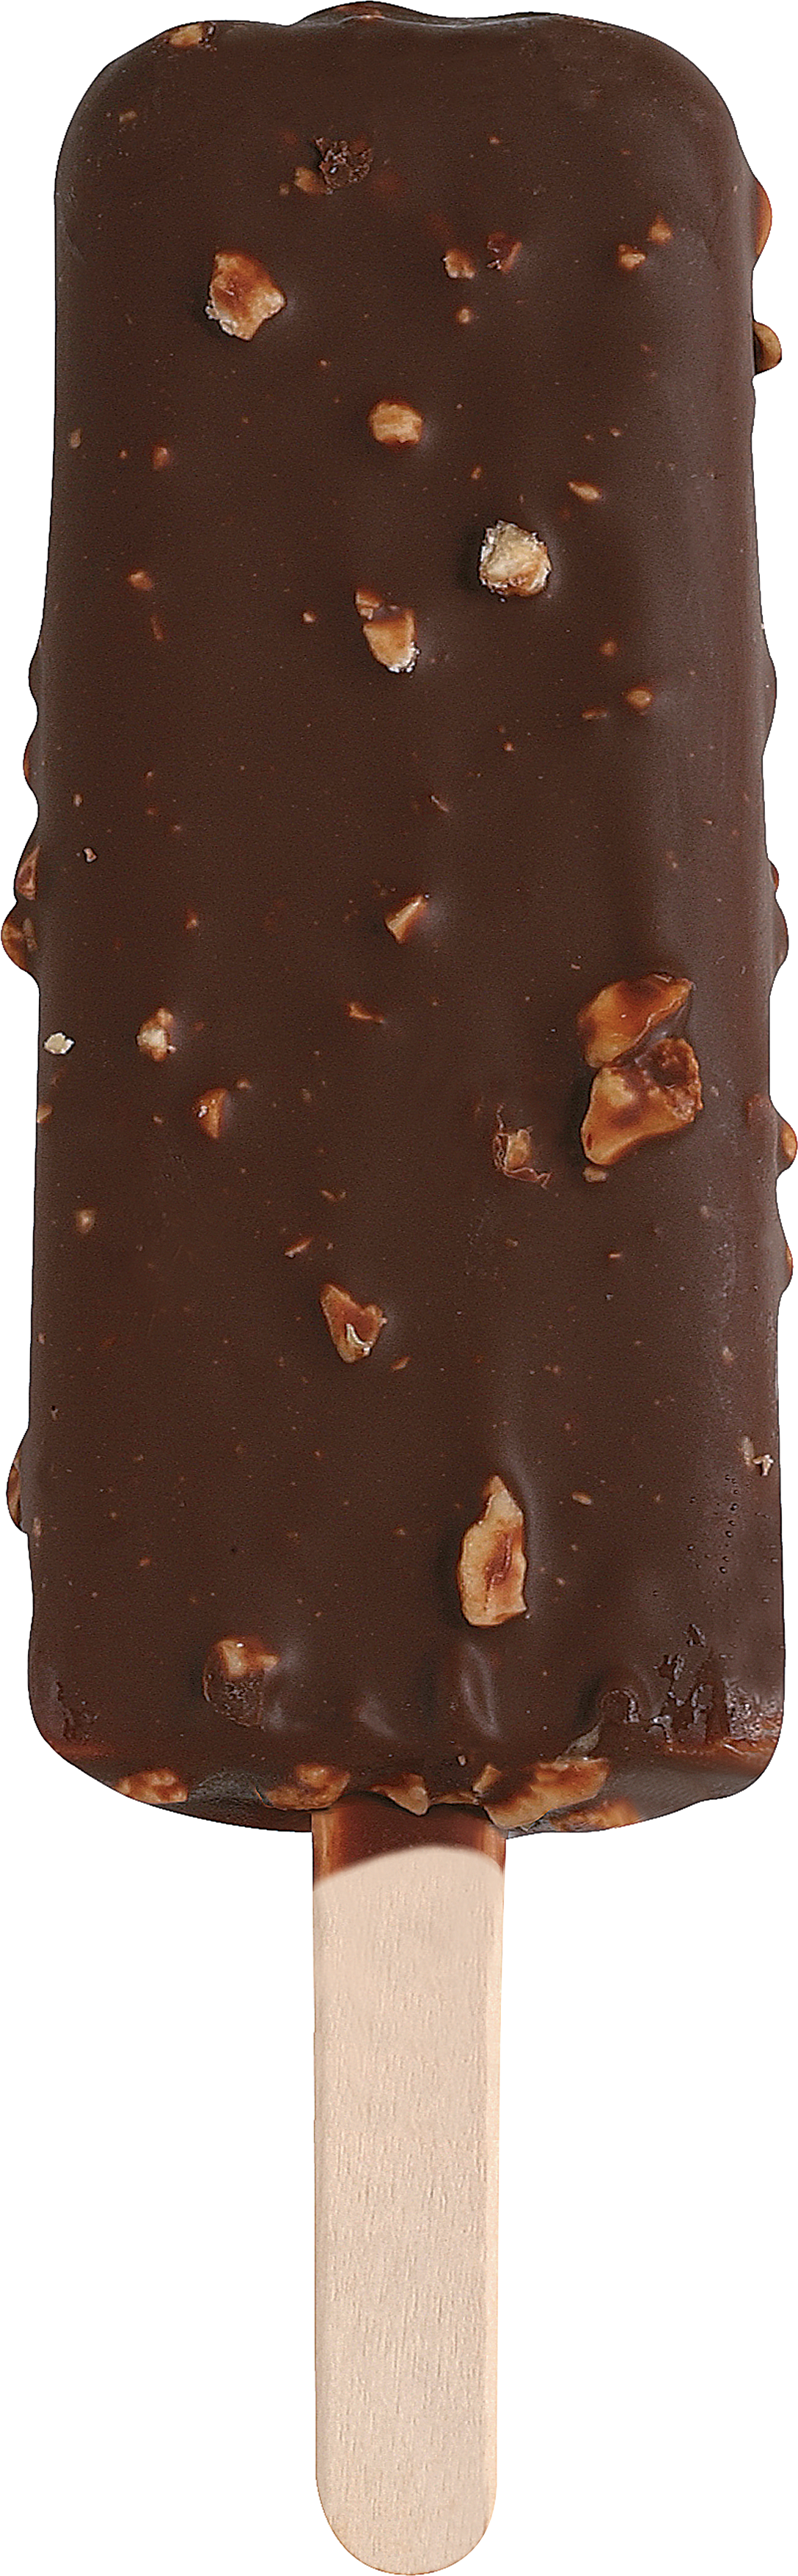 Chocolate Nuts Ice Lolly